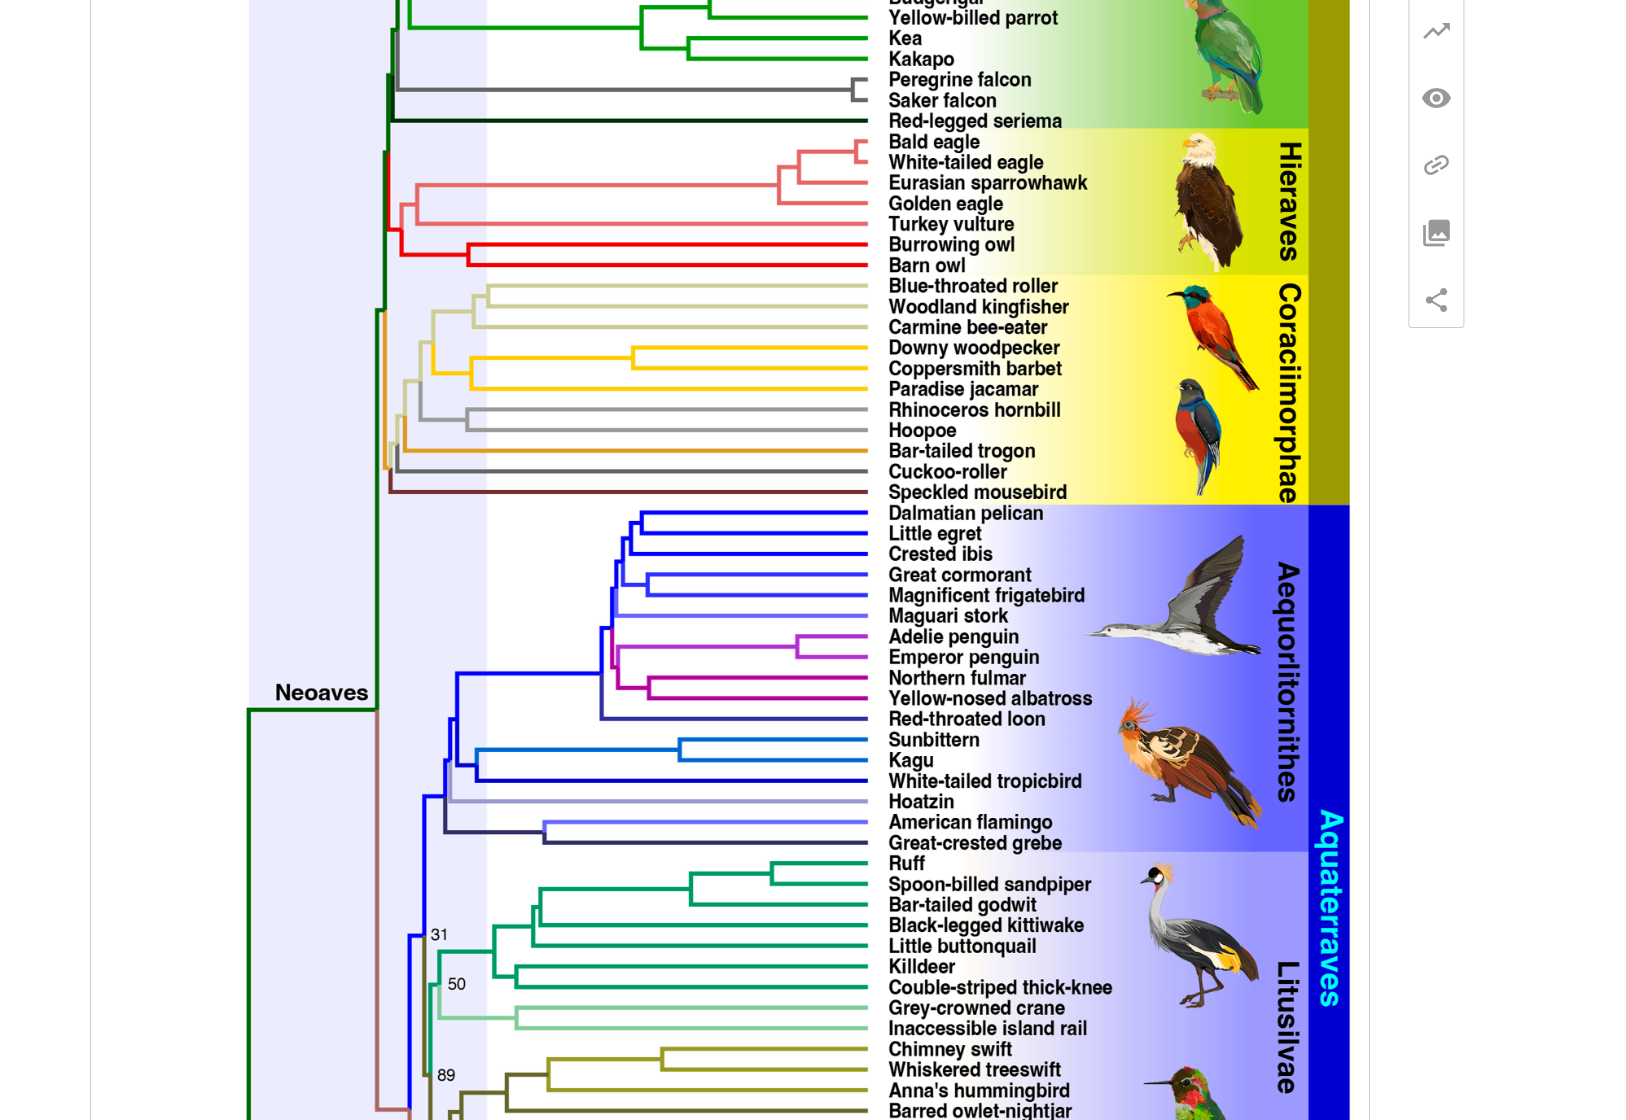 A screenshot shows the two lineages of Neoaves from the article published on the website of PNAS.